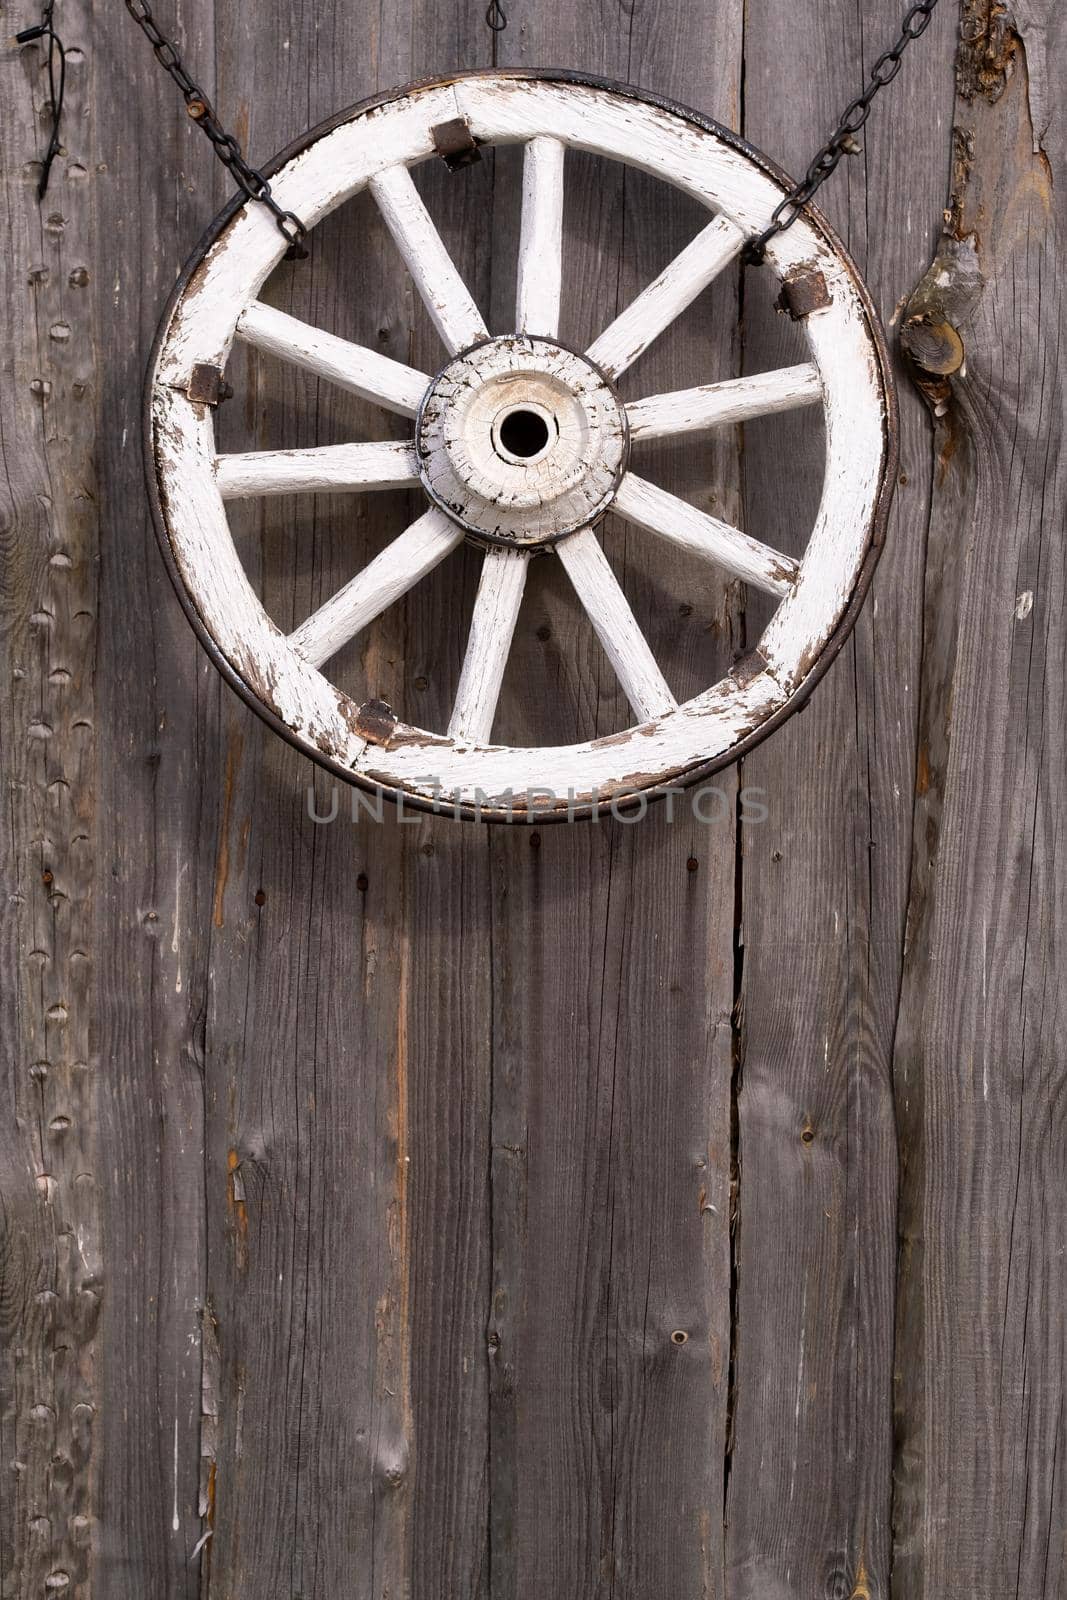 An old wooden carriage wheel hanging on the barn wall.